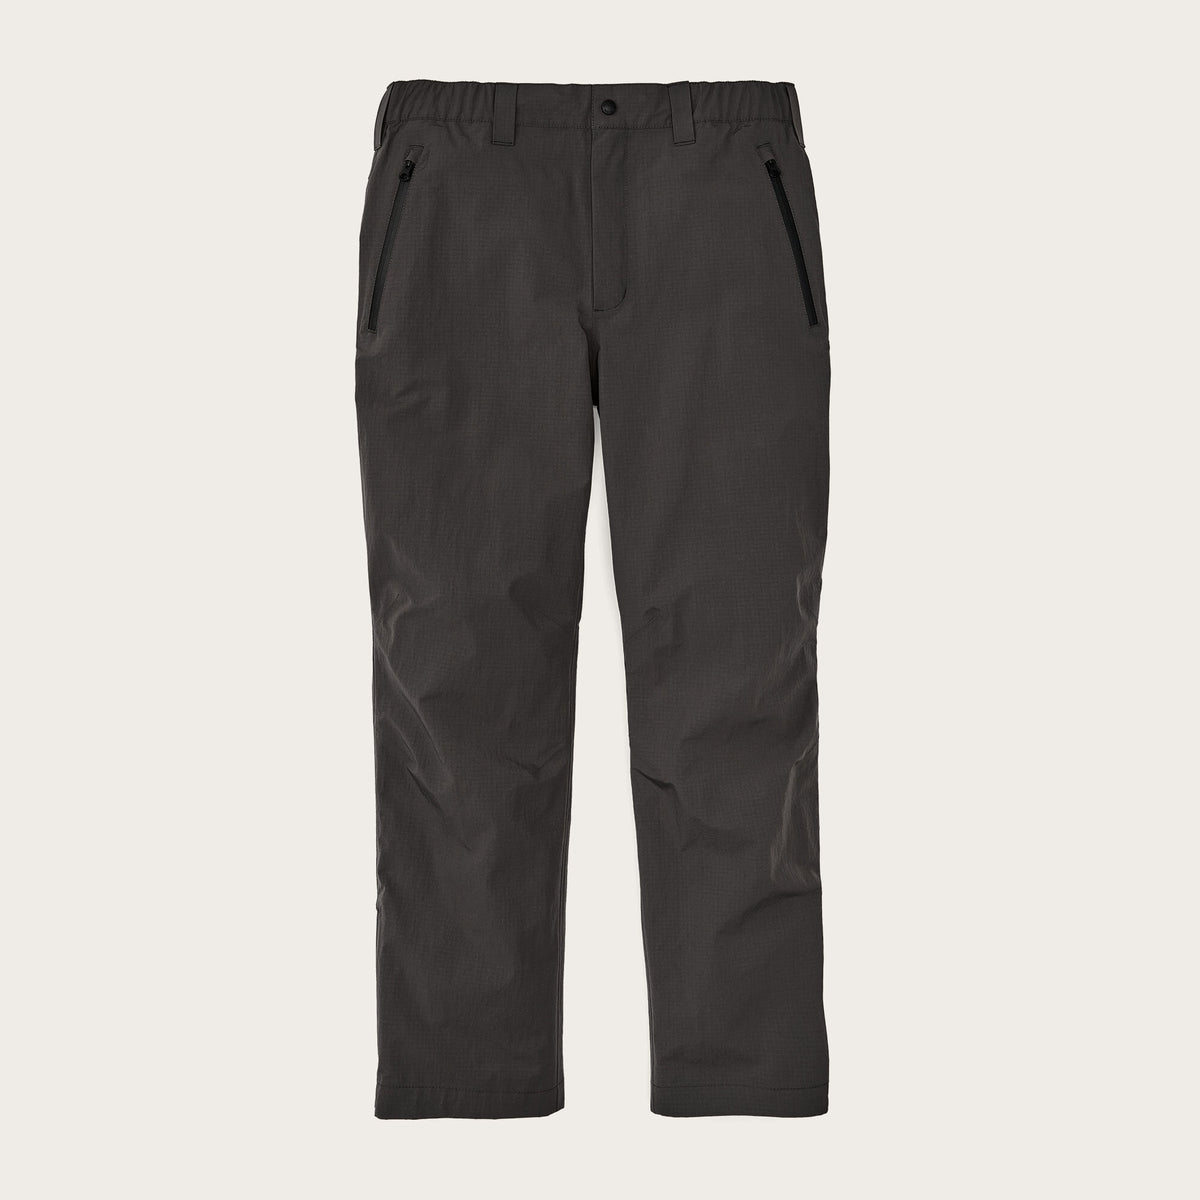 Rain pants for men with storage – Sportchief